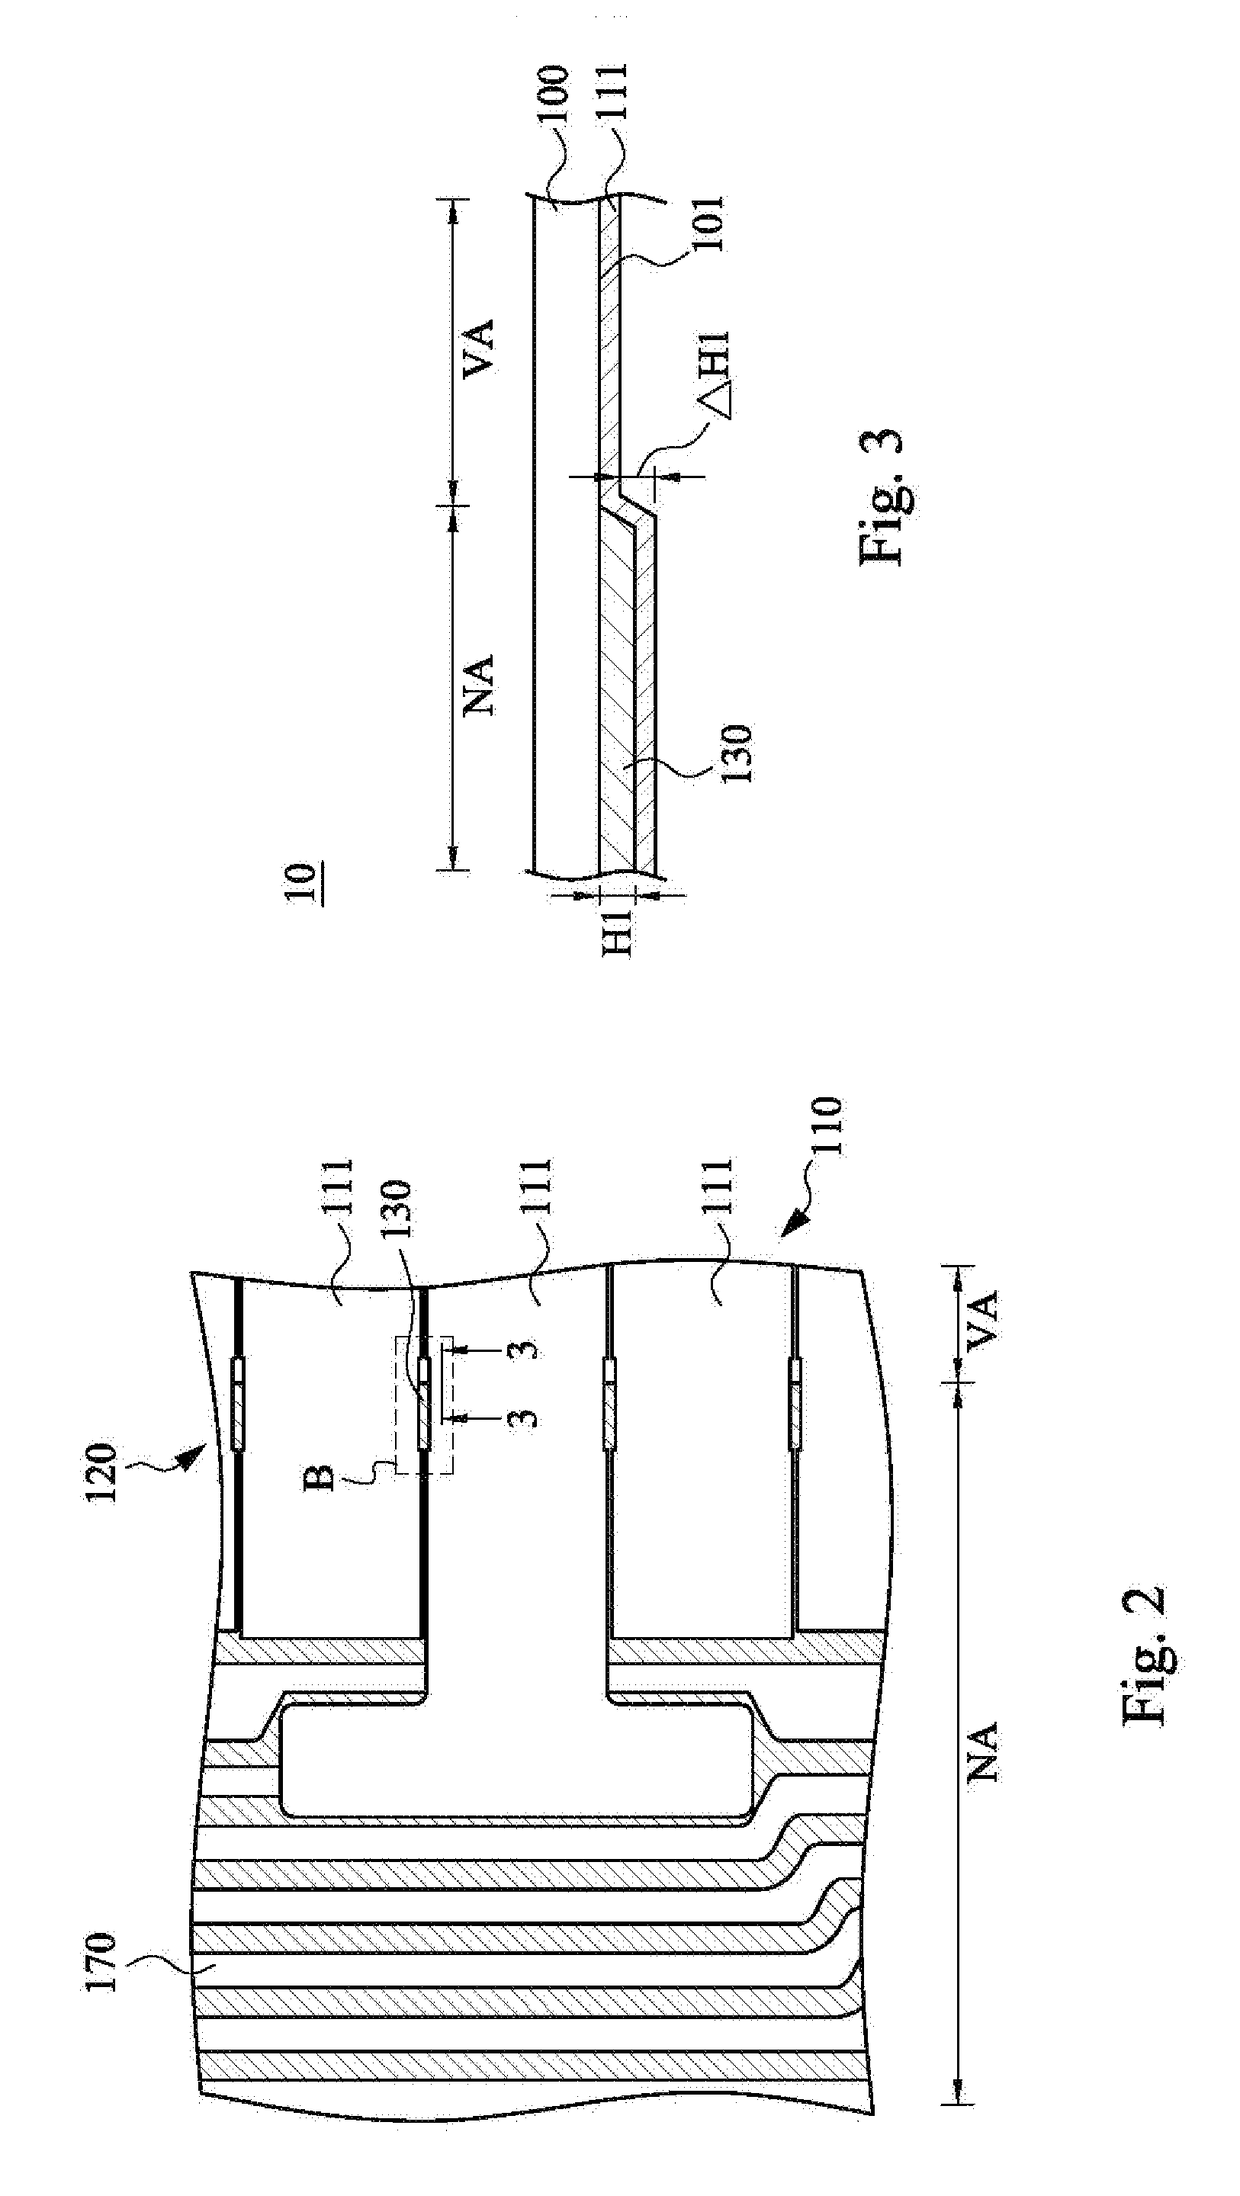 Touch panel having sensing structures in visible and non-visible areas and fabrication method thereof